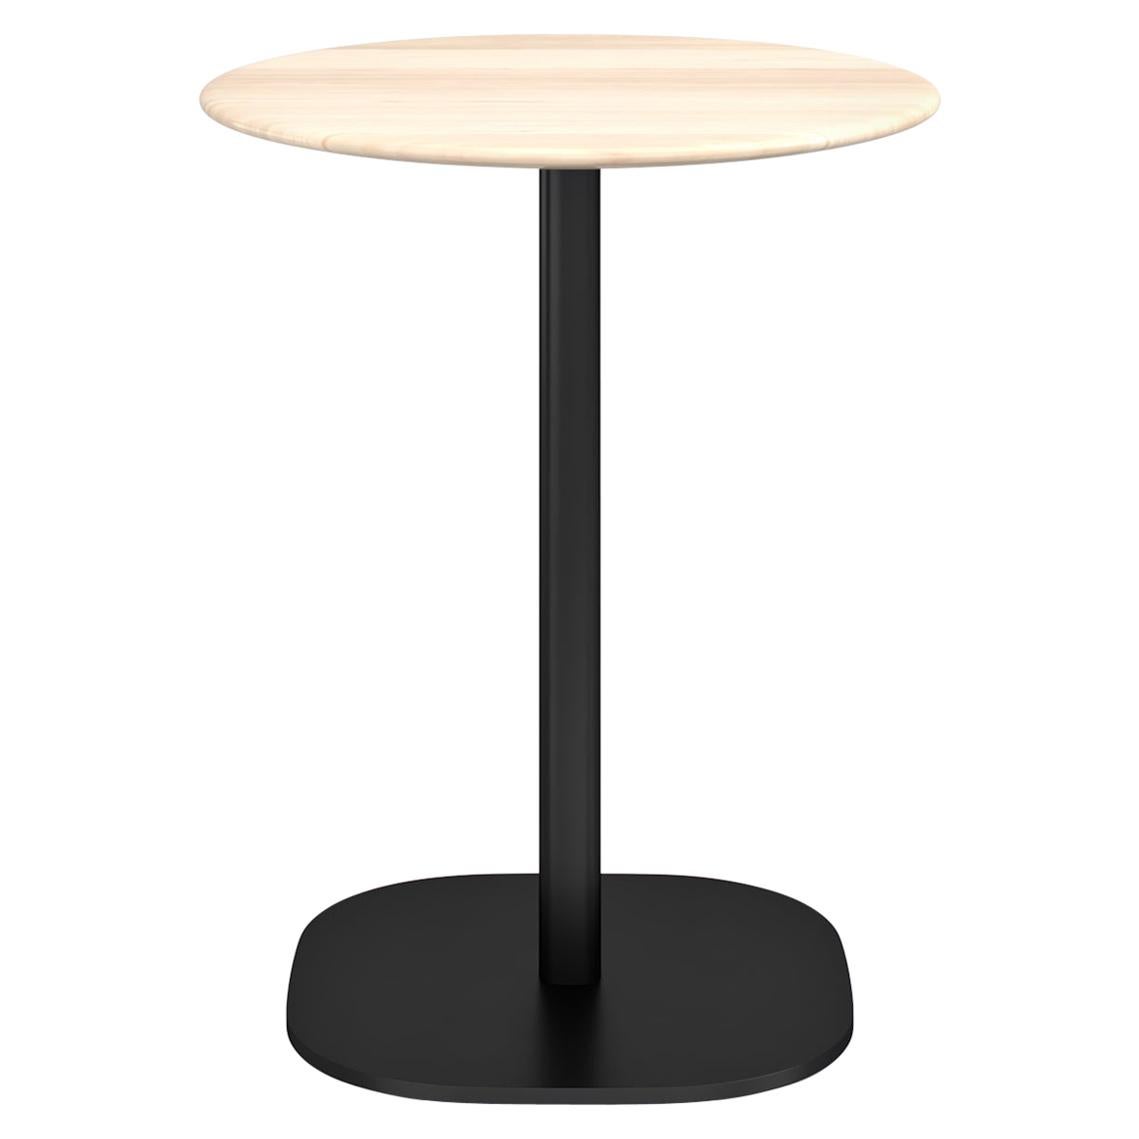 Emeco 2 Inch Round Cafe Table with Black Legs & Wood Top by Jasper Morrison For Sale